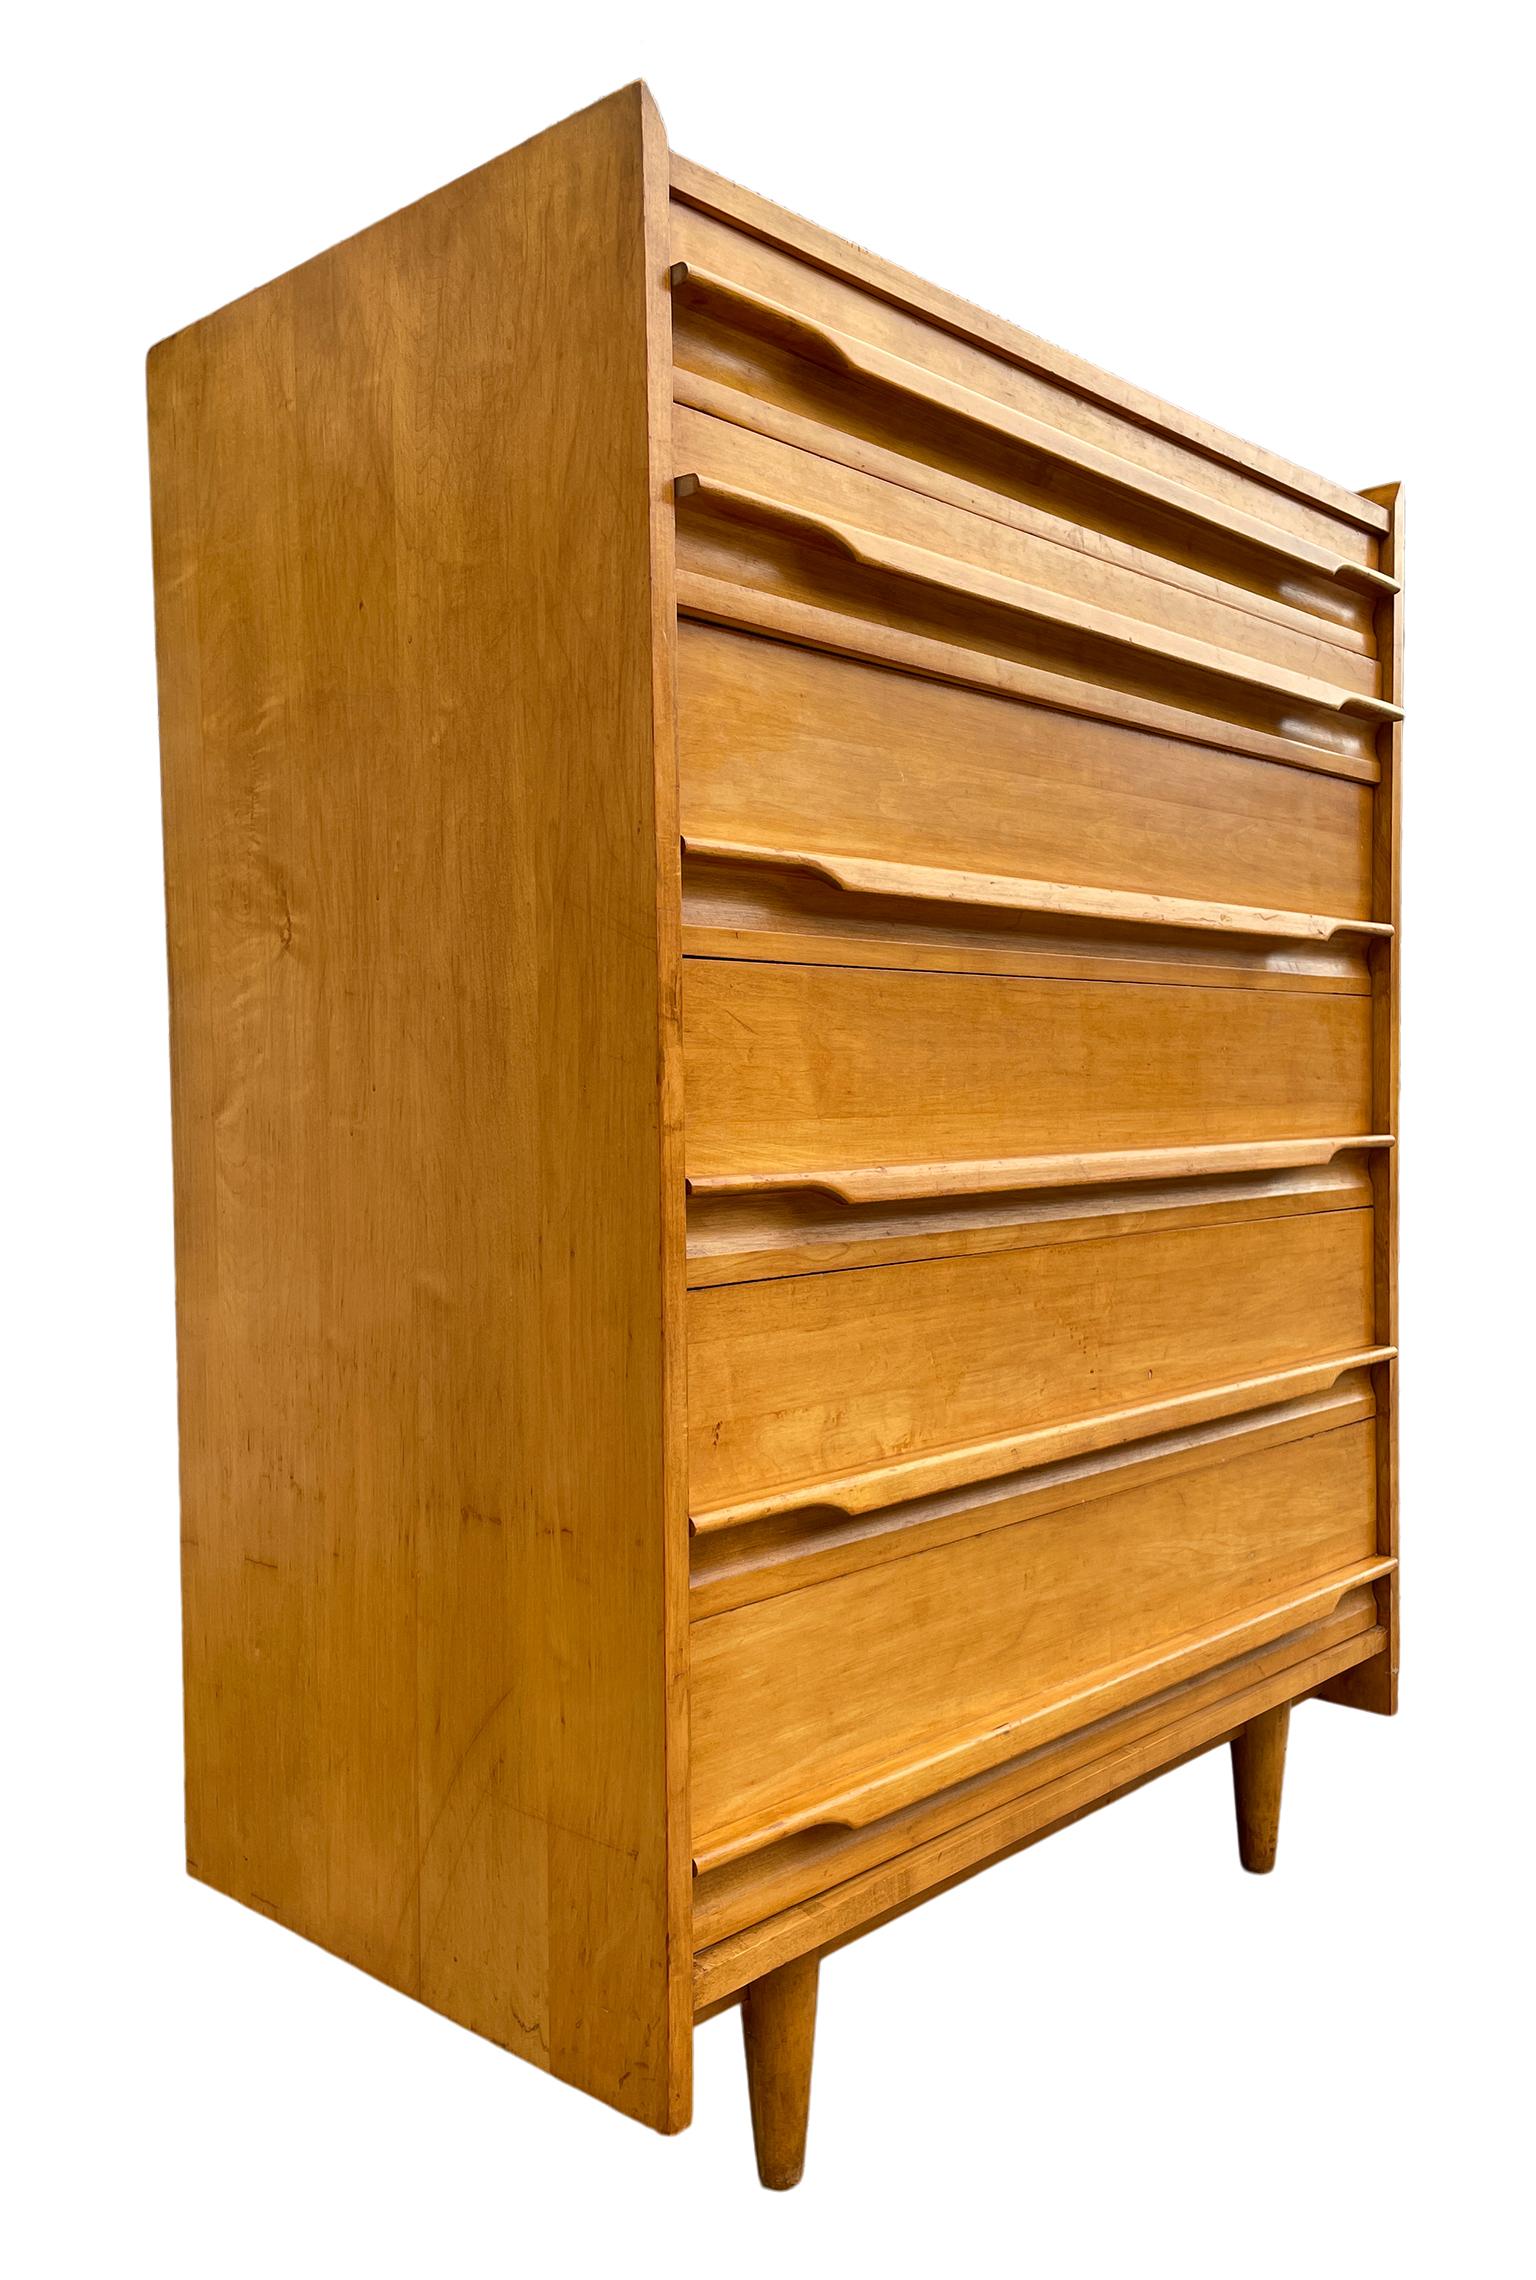 Mid-20th Century Unique Mid-Century Modern American Maple Tall 6 Drawer Dresser by Crawford For Sale